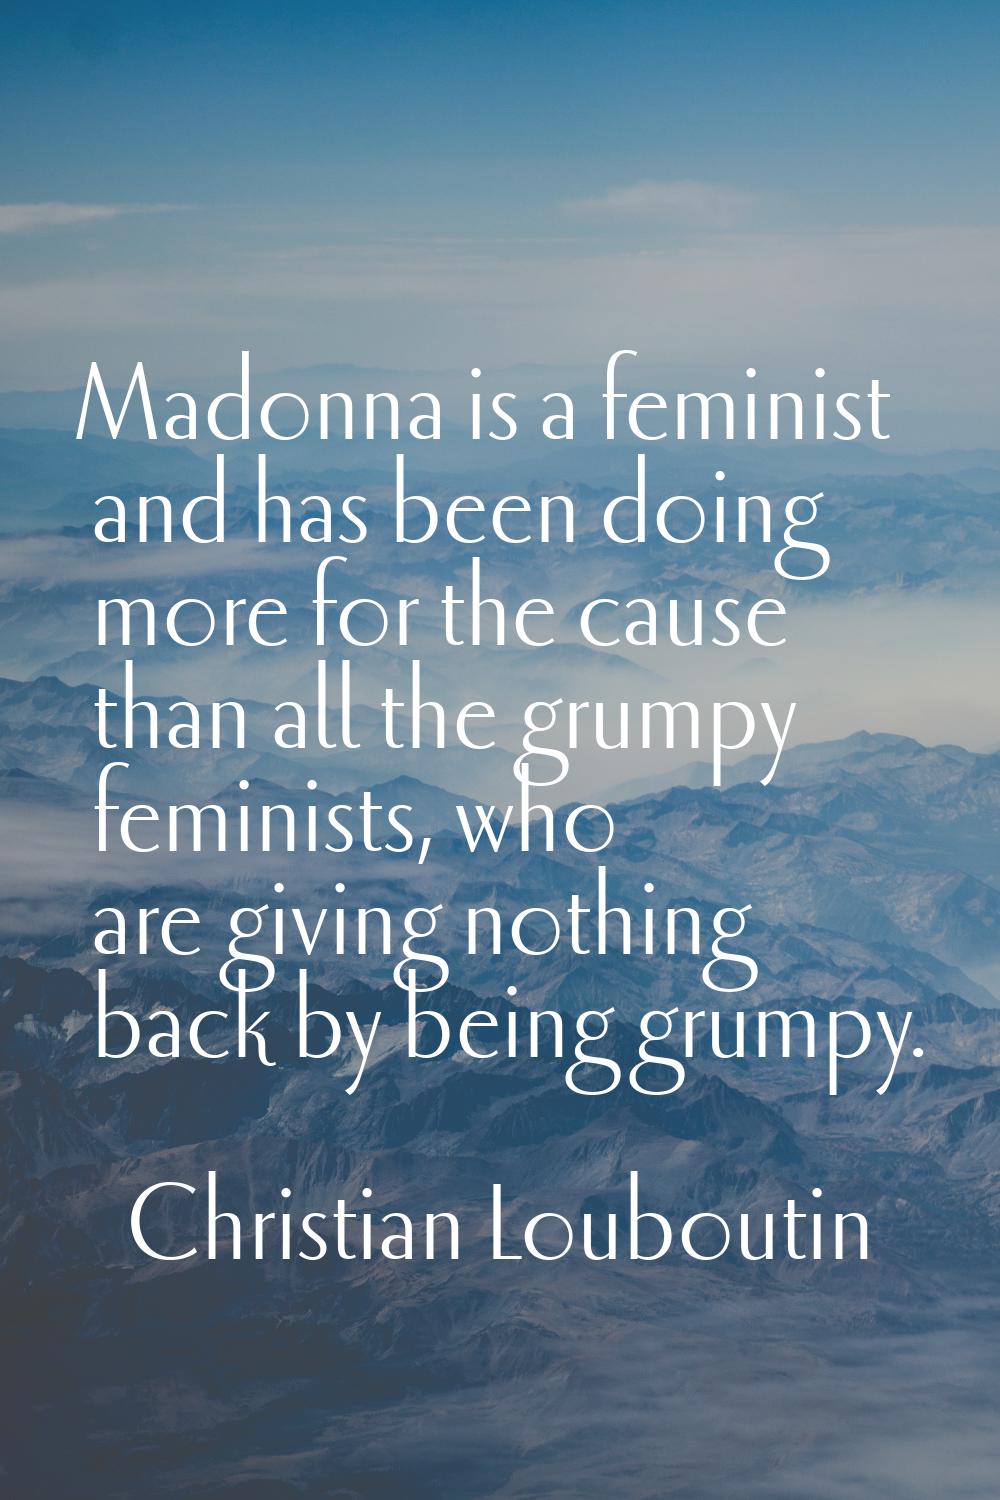 Madonna is a feminist and has been doing more for the cause than all the grumpy feminists, who are 